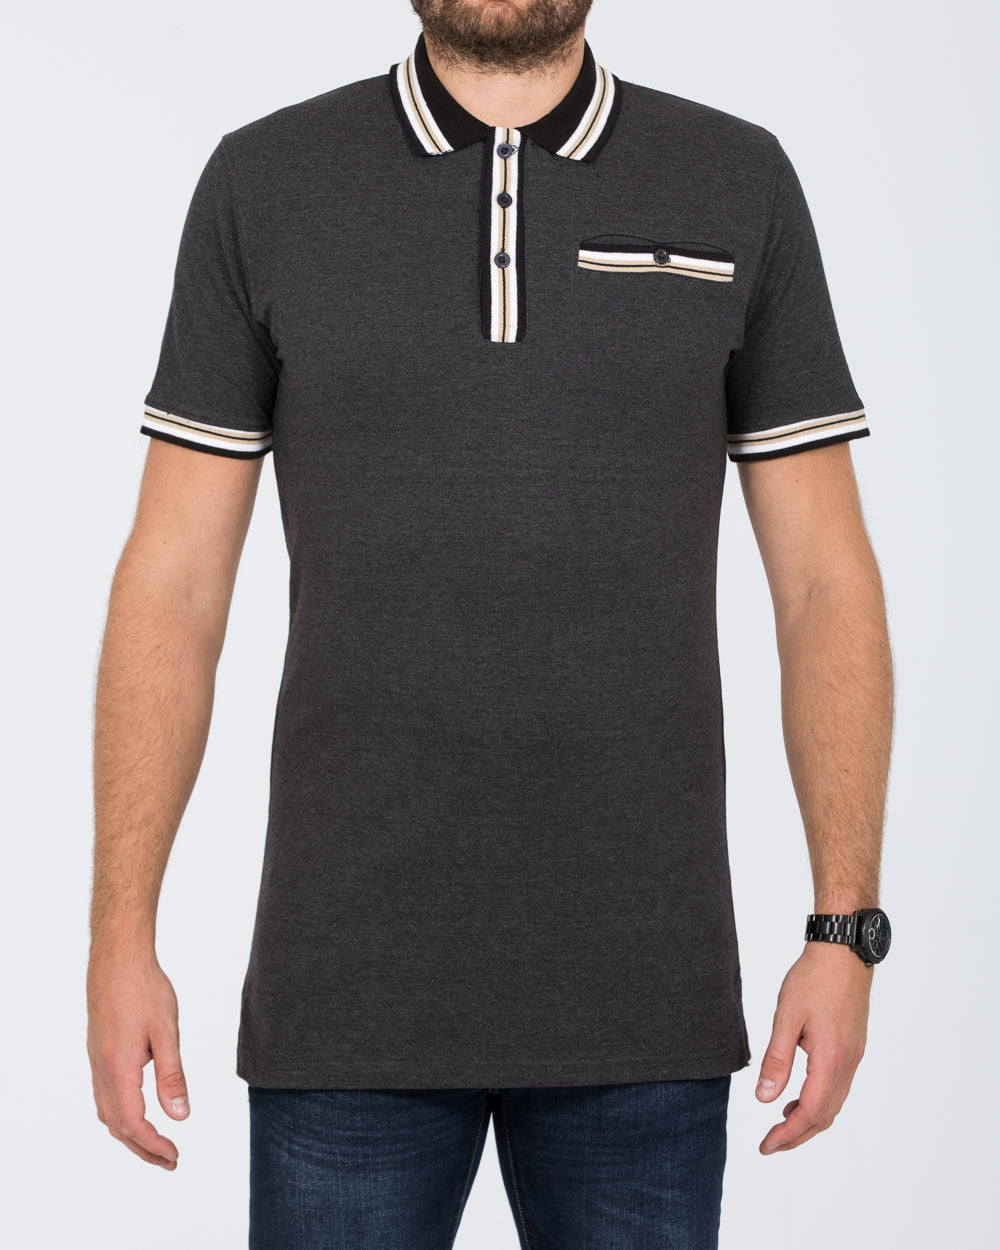 2t Slim Fit Pique Tipped Polo Shirt (charcoal)